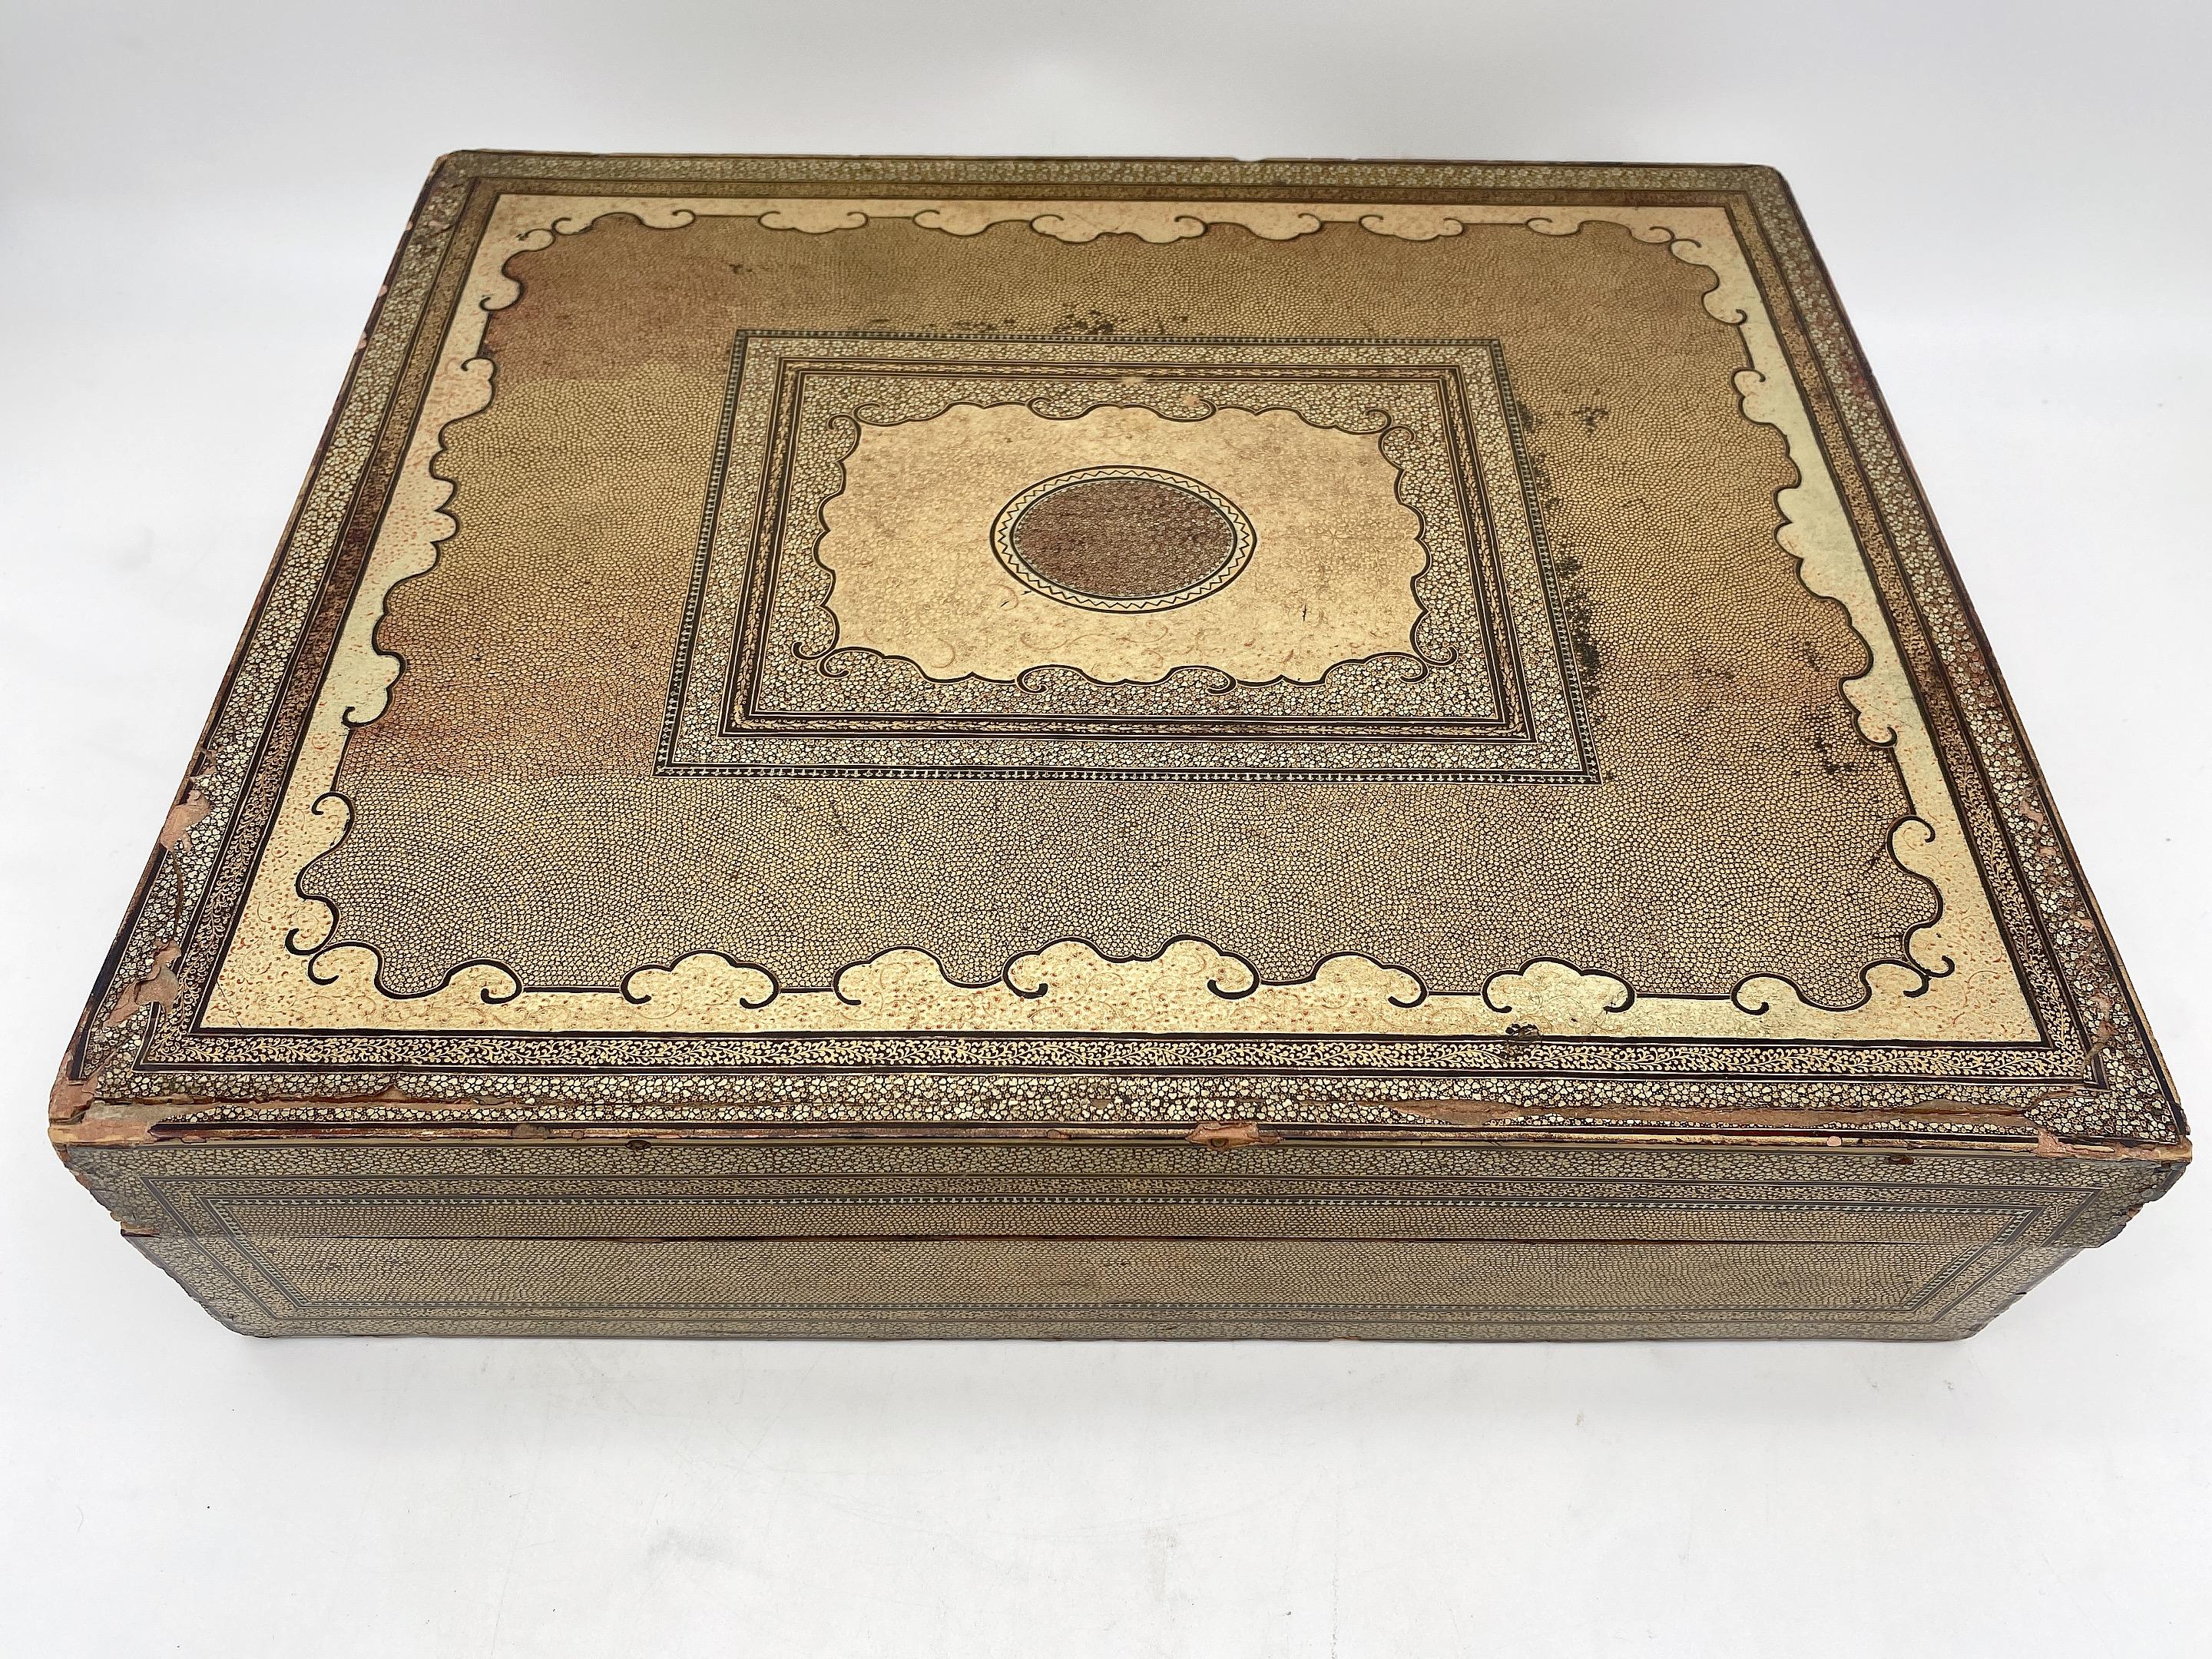 19th Century Chinese Gilt Lacquer Gambling Storage Box Trays and Dishes In Good Condition For Sale In Brea, CA